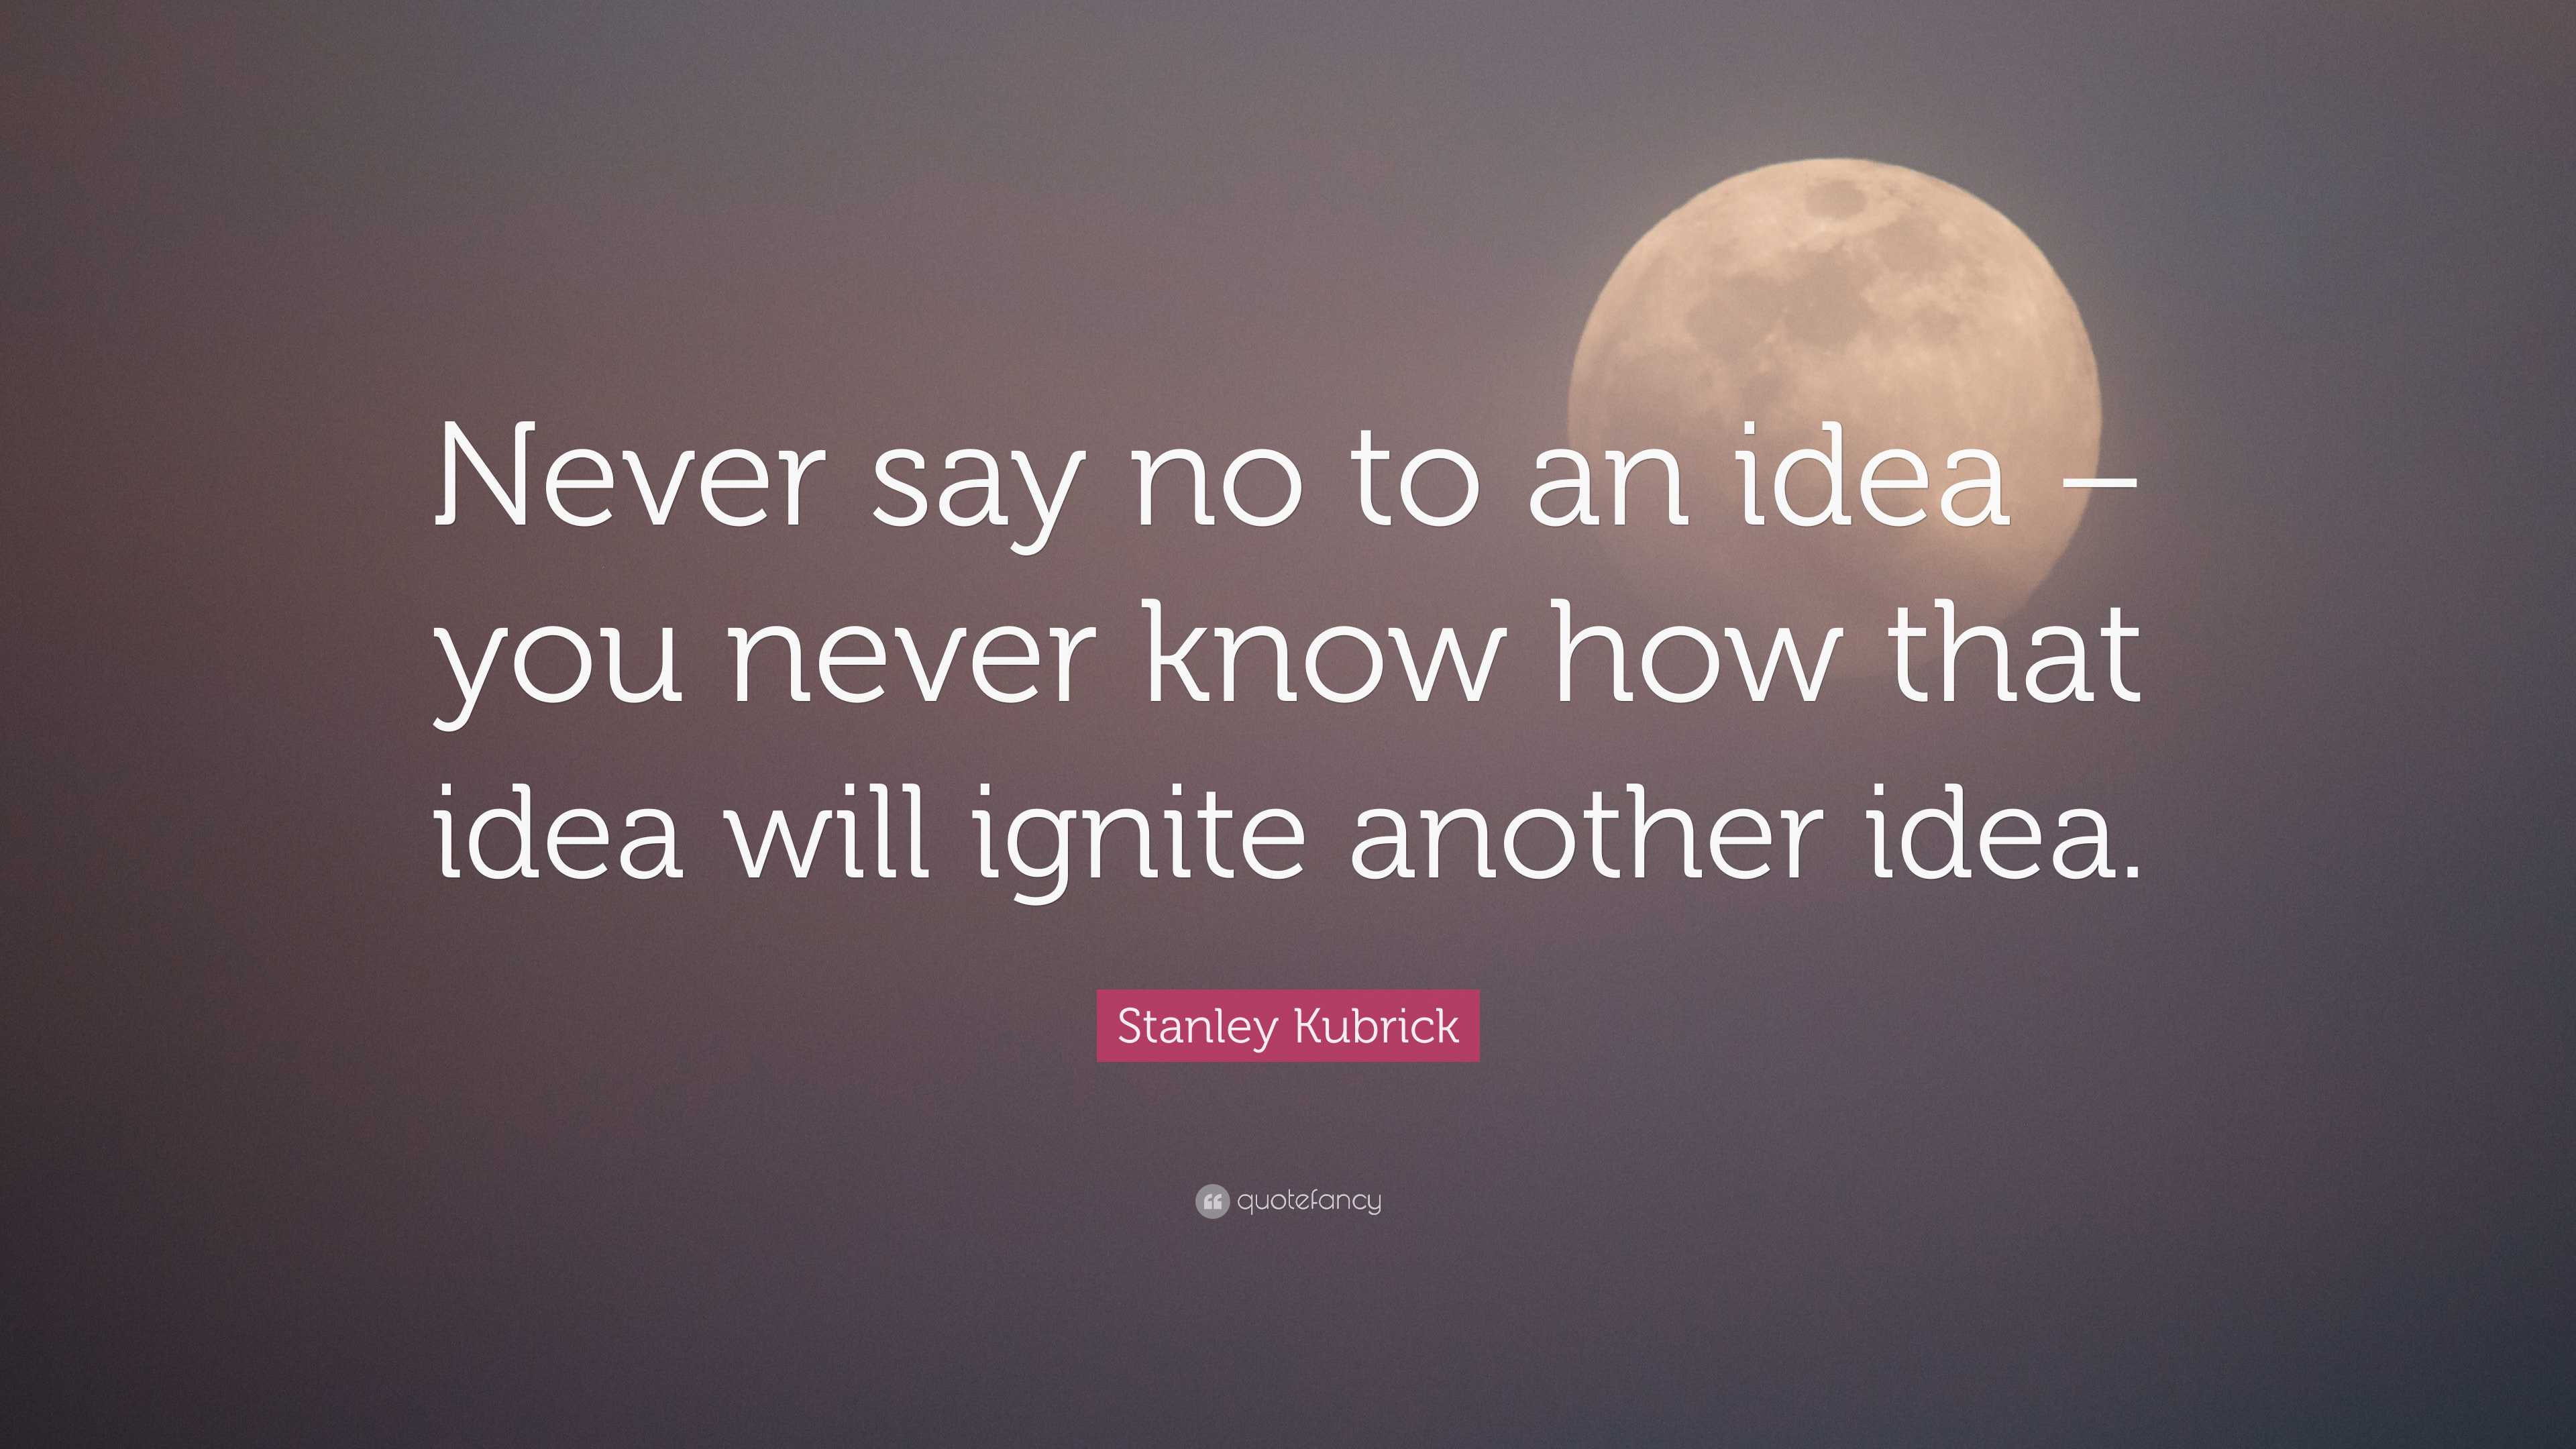 Stanley Kubrick Quote: “Never say no to an idea – you never know how ...